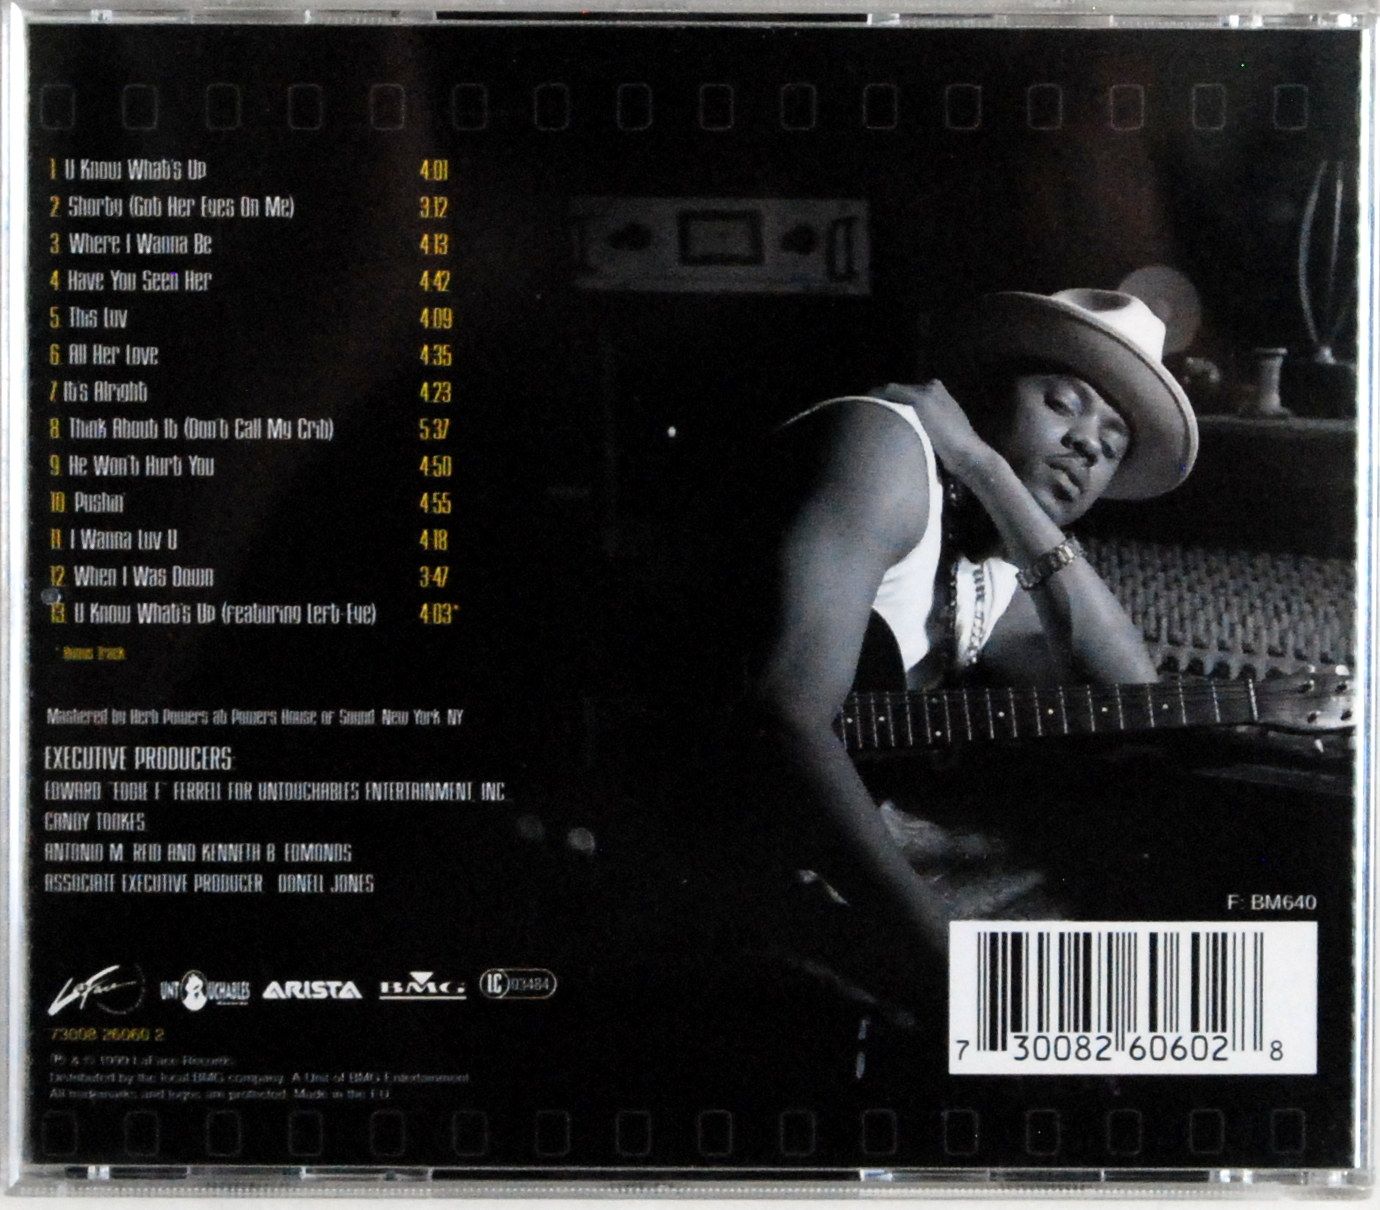 (CD) Donell Jones - Where I Wanna Be